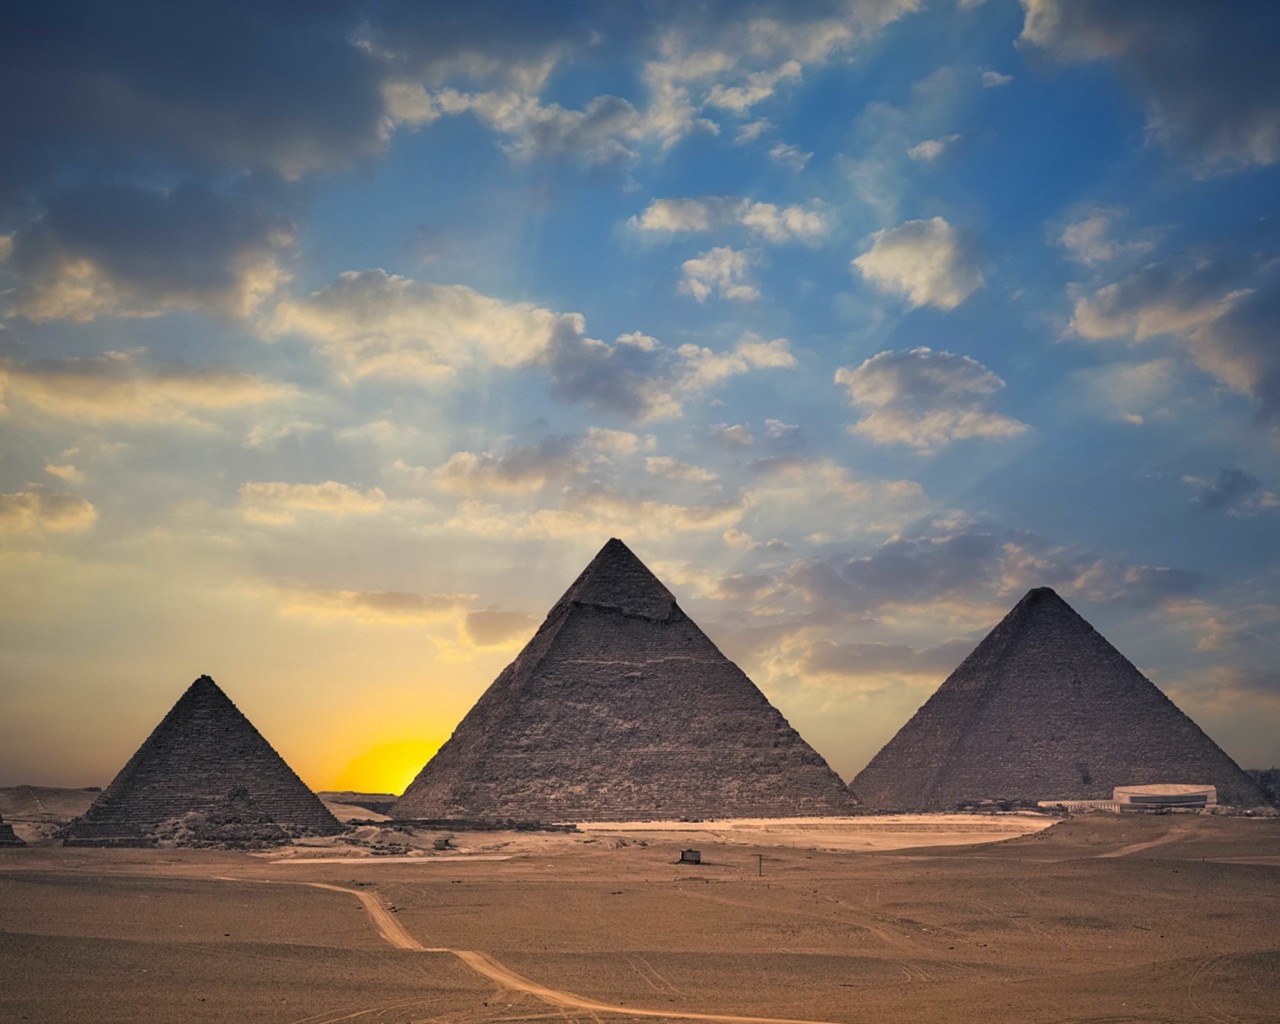 The Great Pyramids of Giza Wallpaper for Desktop 1280x1024